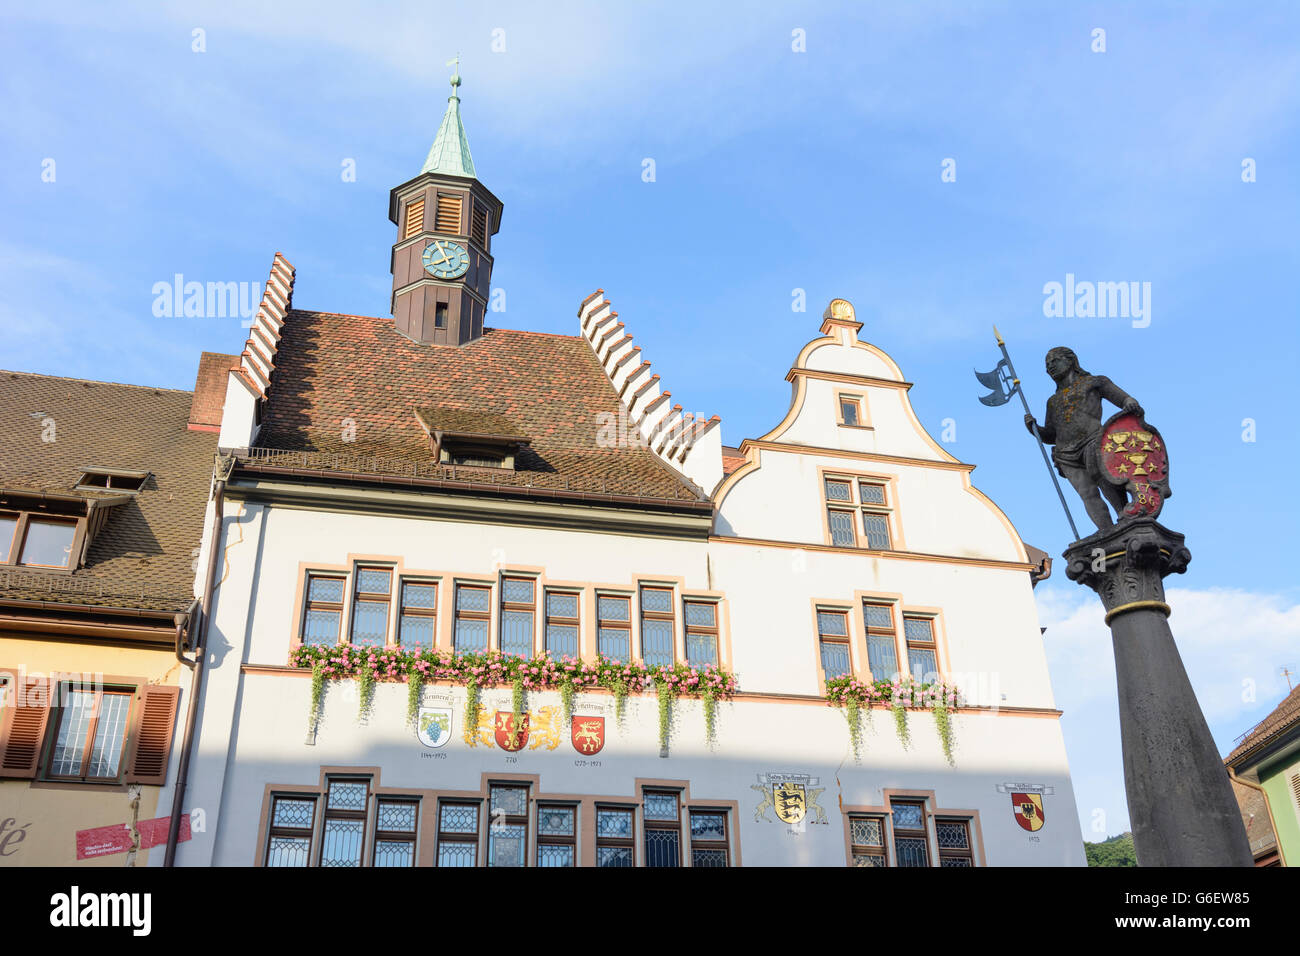 Town Square with City Hall and uplift cracks as a result of faulty geothermal drilling, Staufen im Breisgau, Germany, Baden-Würt Stock Photo